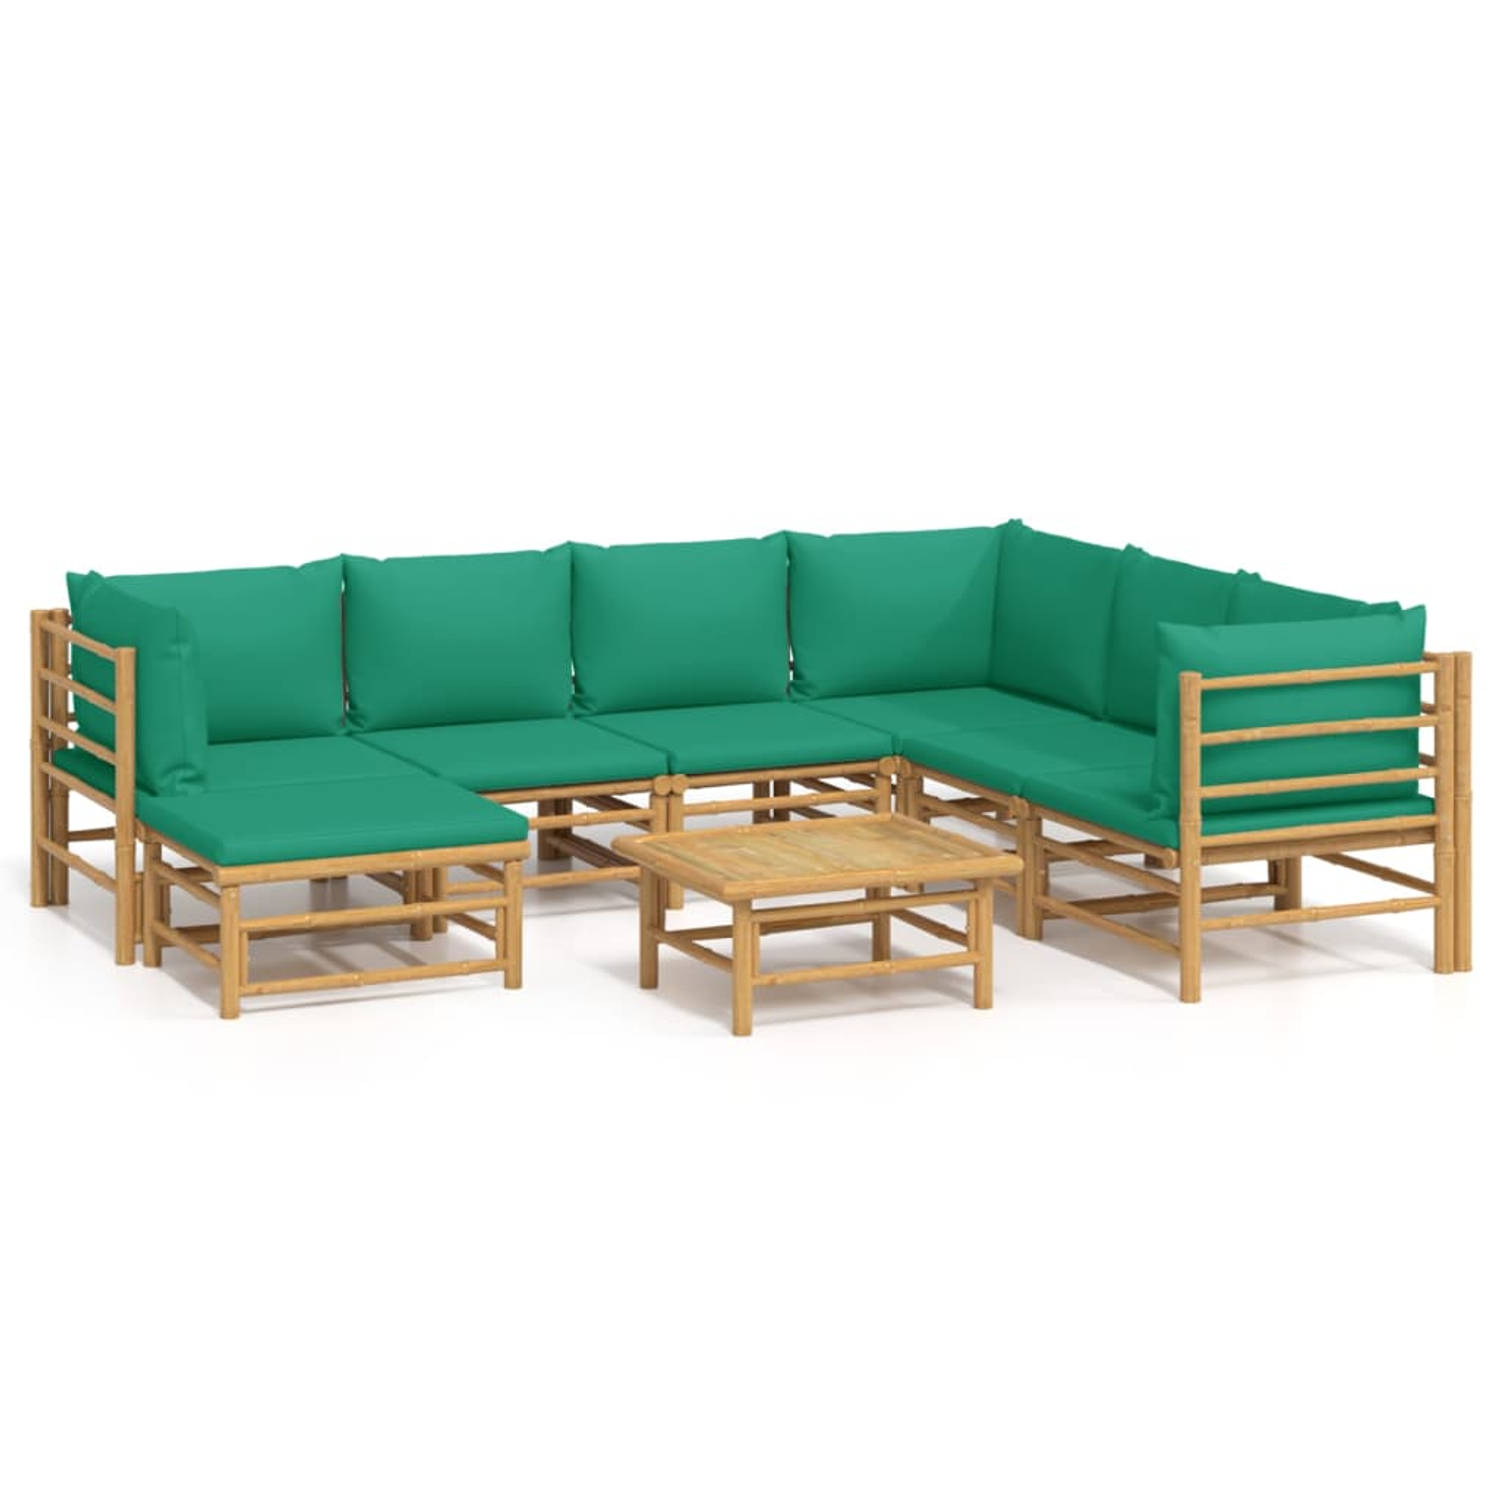 The Living Store Bamboe Loungeset - Modulair - Groen Kussen - 55x65 cm - 69x69 cm - 55x65 cm - 150x30 cm - 55x65 cm - 7 zitkussens - 9 rugkussens